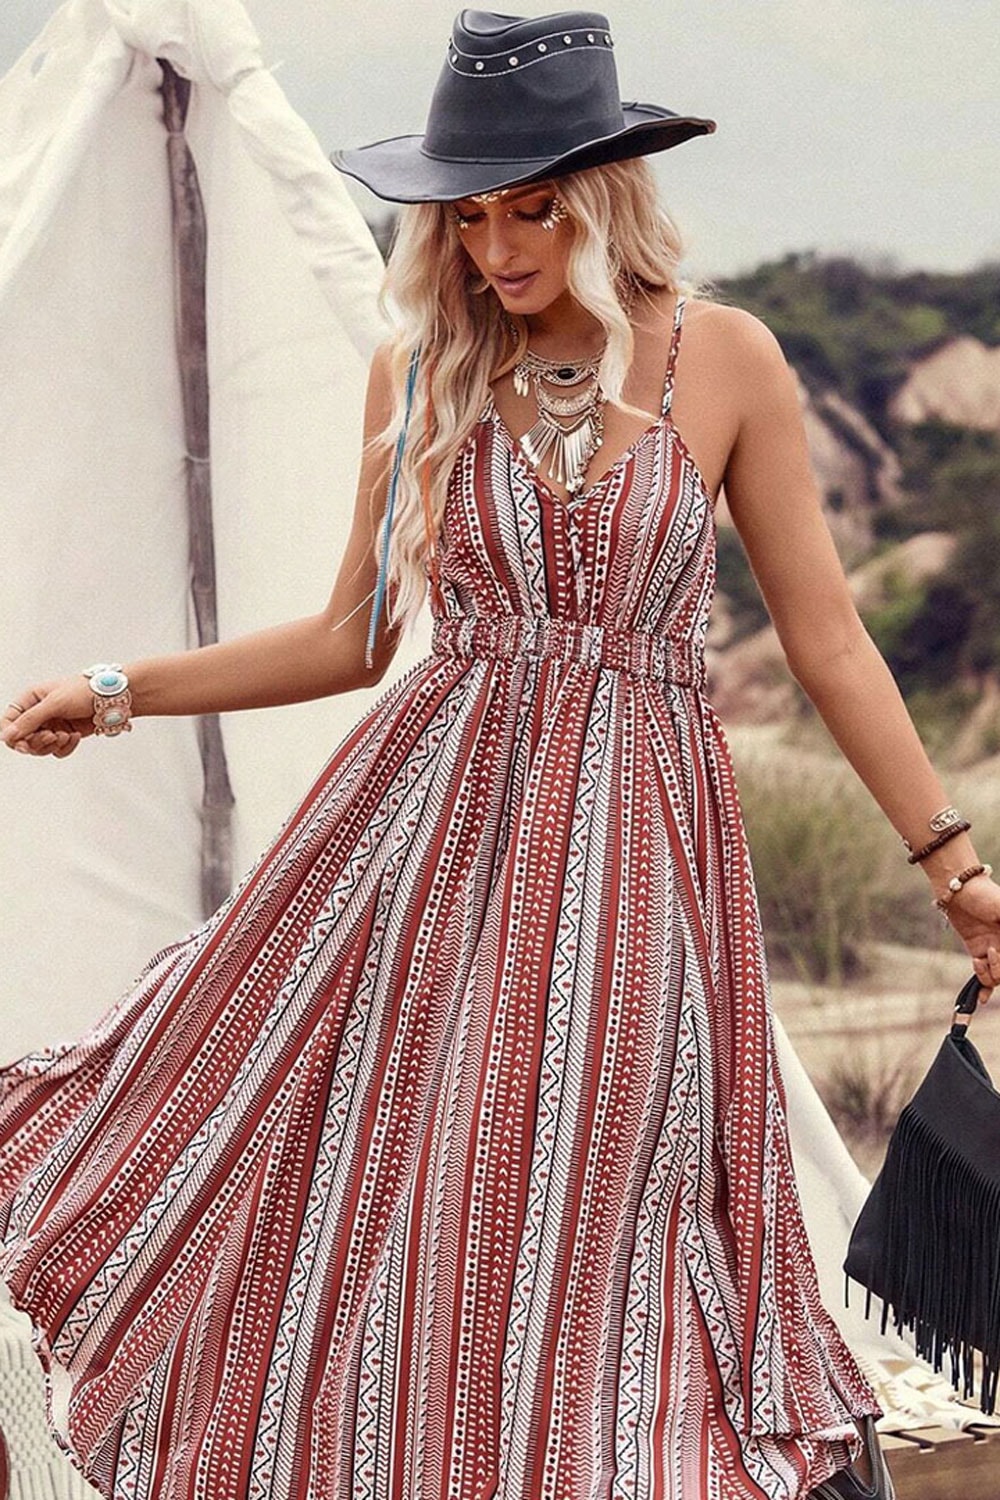 shein stagecoach music festival collaborative collection collaboration line cowboy country west western california men women curve accessories inspired tops skirts dresses tassel fringe